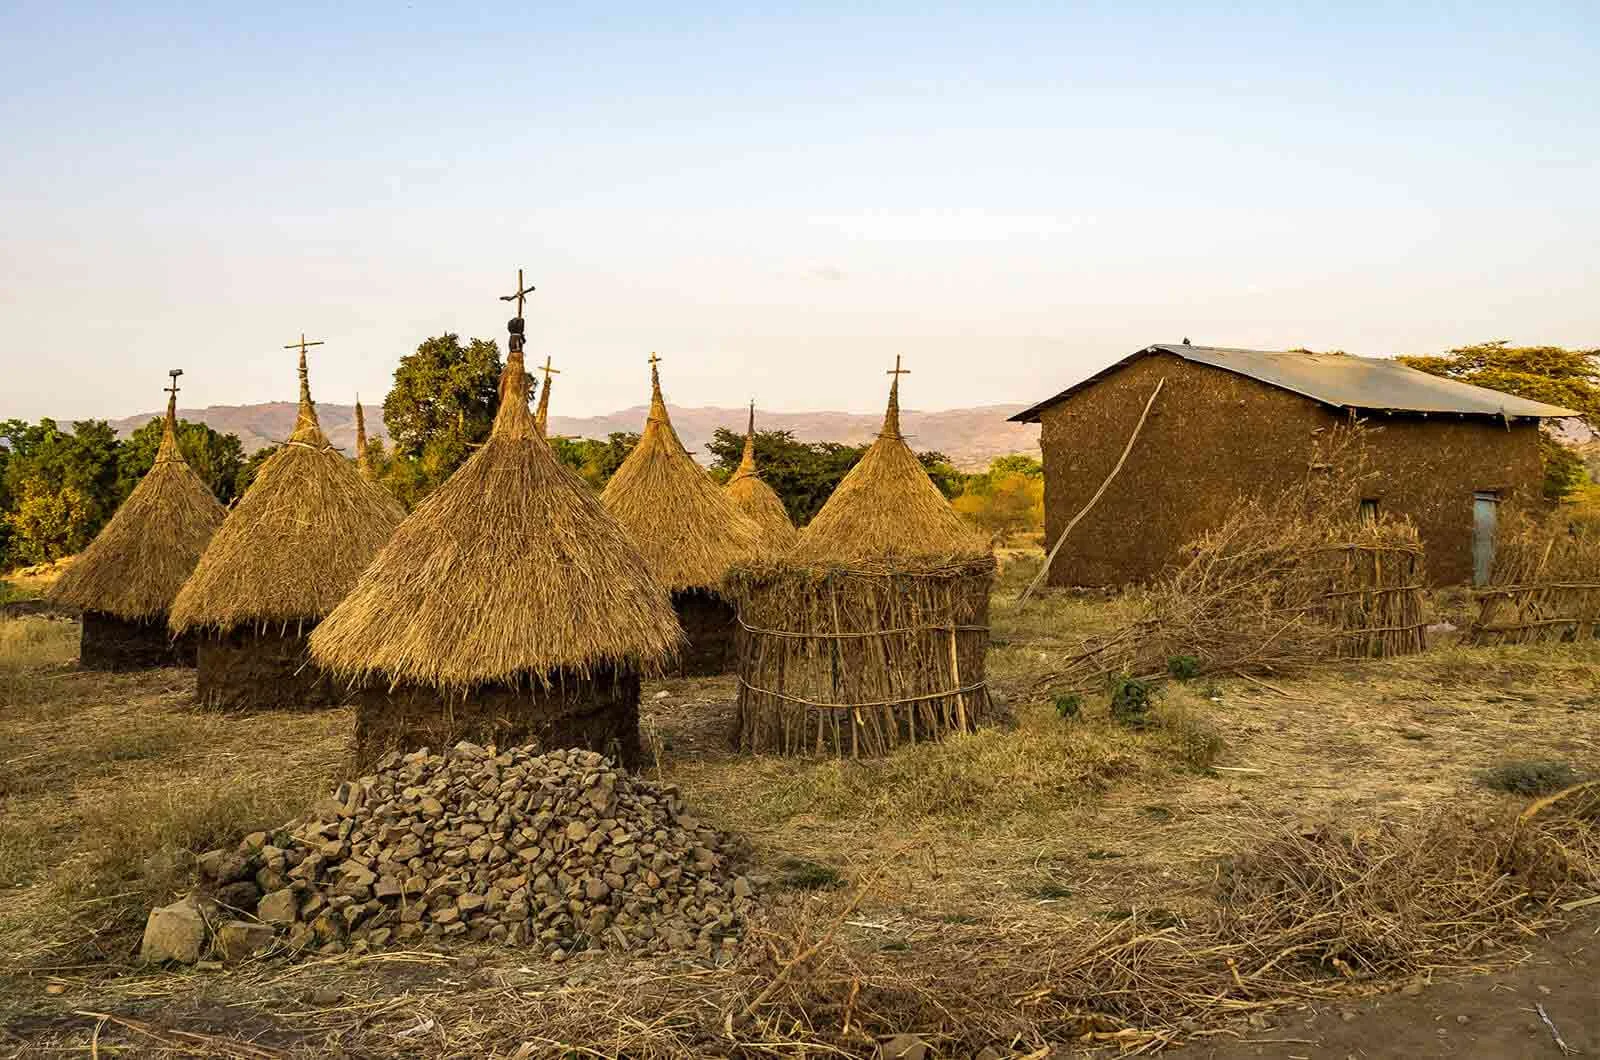 Some thatched houses with piles of stones in Ethiopia, Africa. Concept of the Amharic language of Ethiopia.